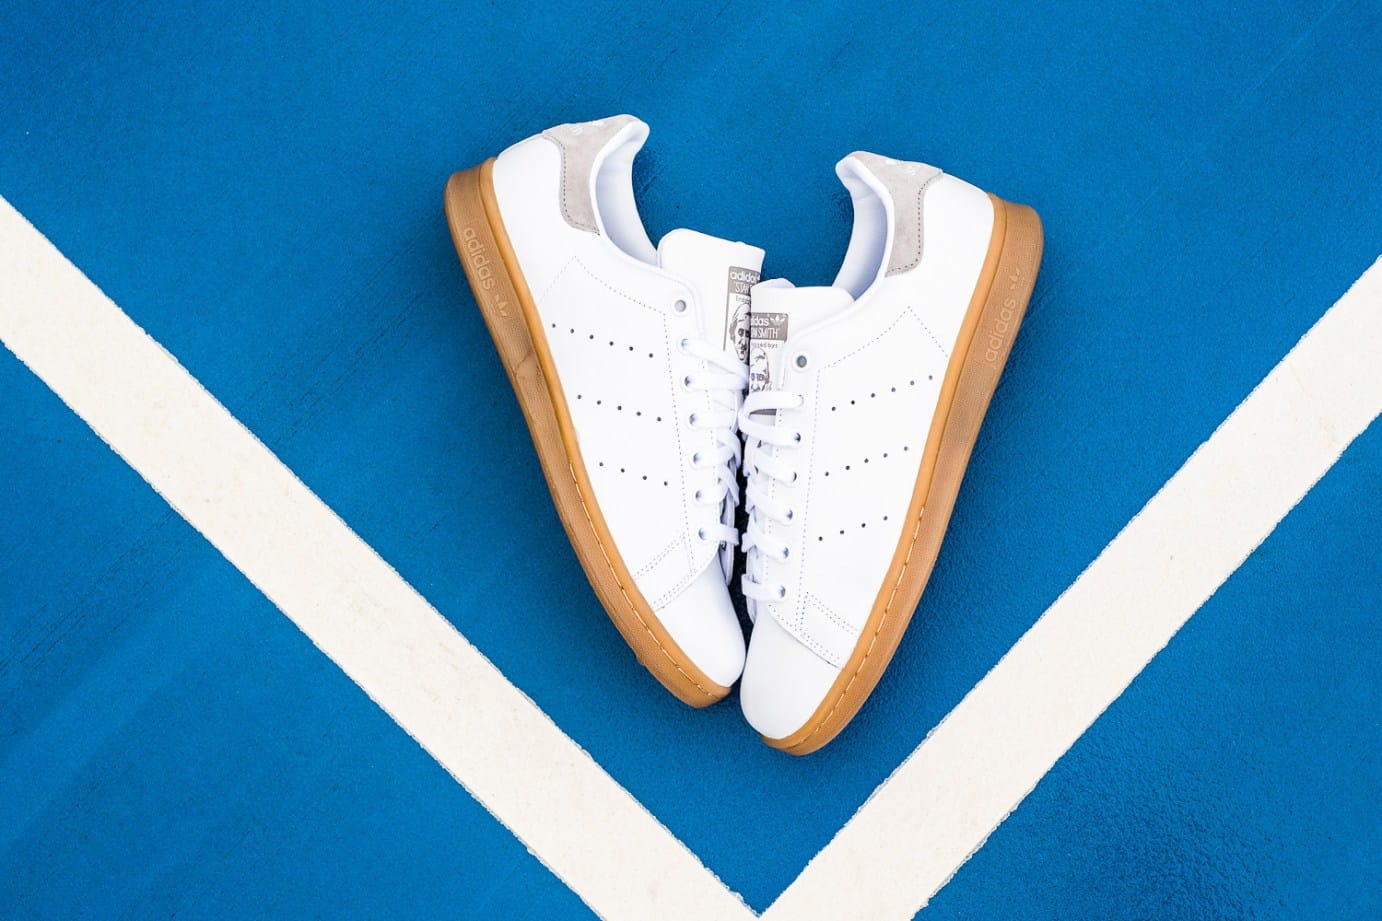 stan smith gum sole sneakers